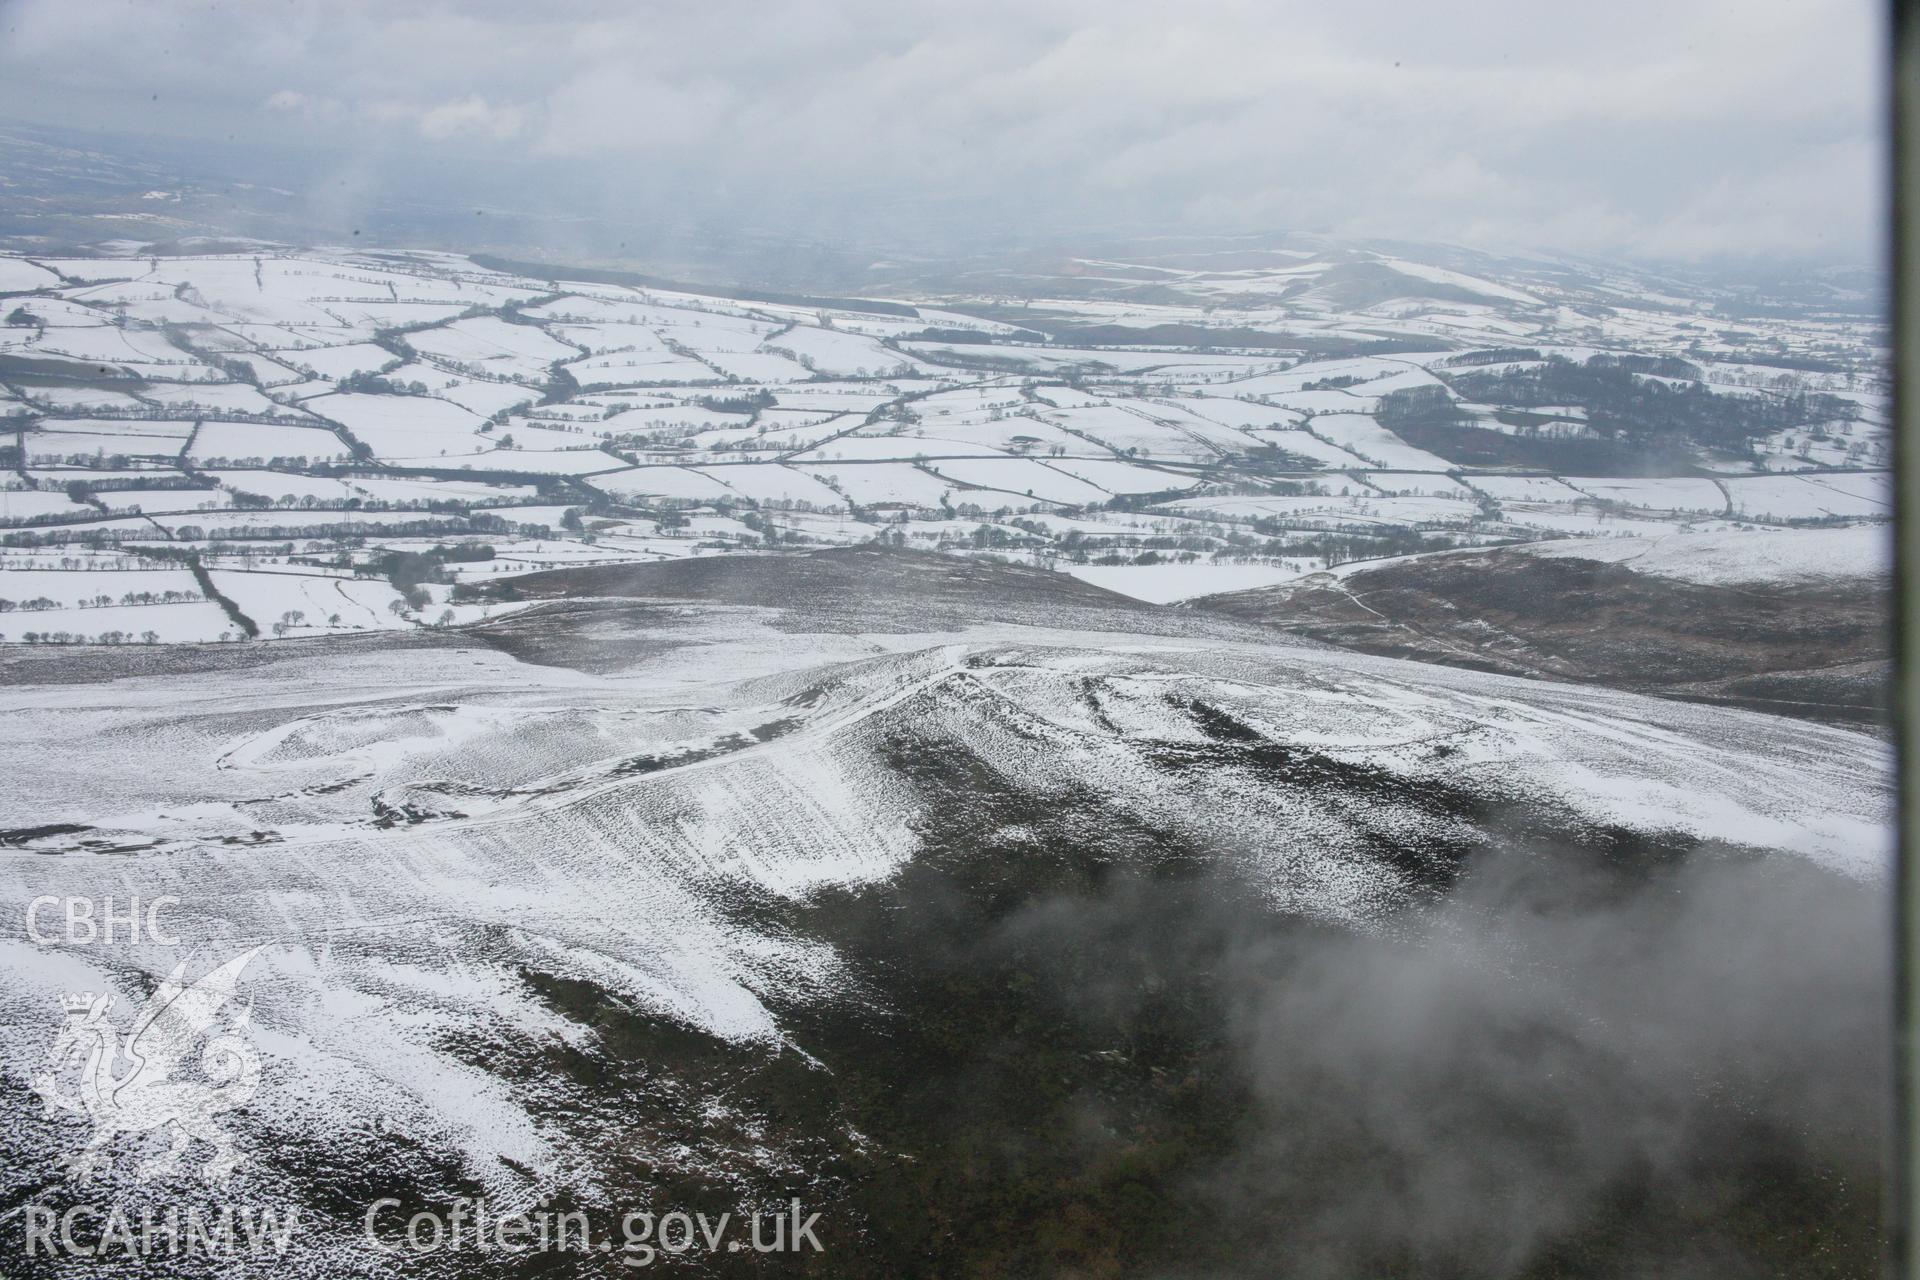 RCAHMW colour oblique aerial photograph of Moel-y-Gaer Hillfort, Llantysilio in winter landscape from the south-west. Taken on 06 March 2006 by Toby Driver.